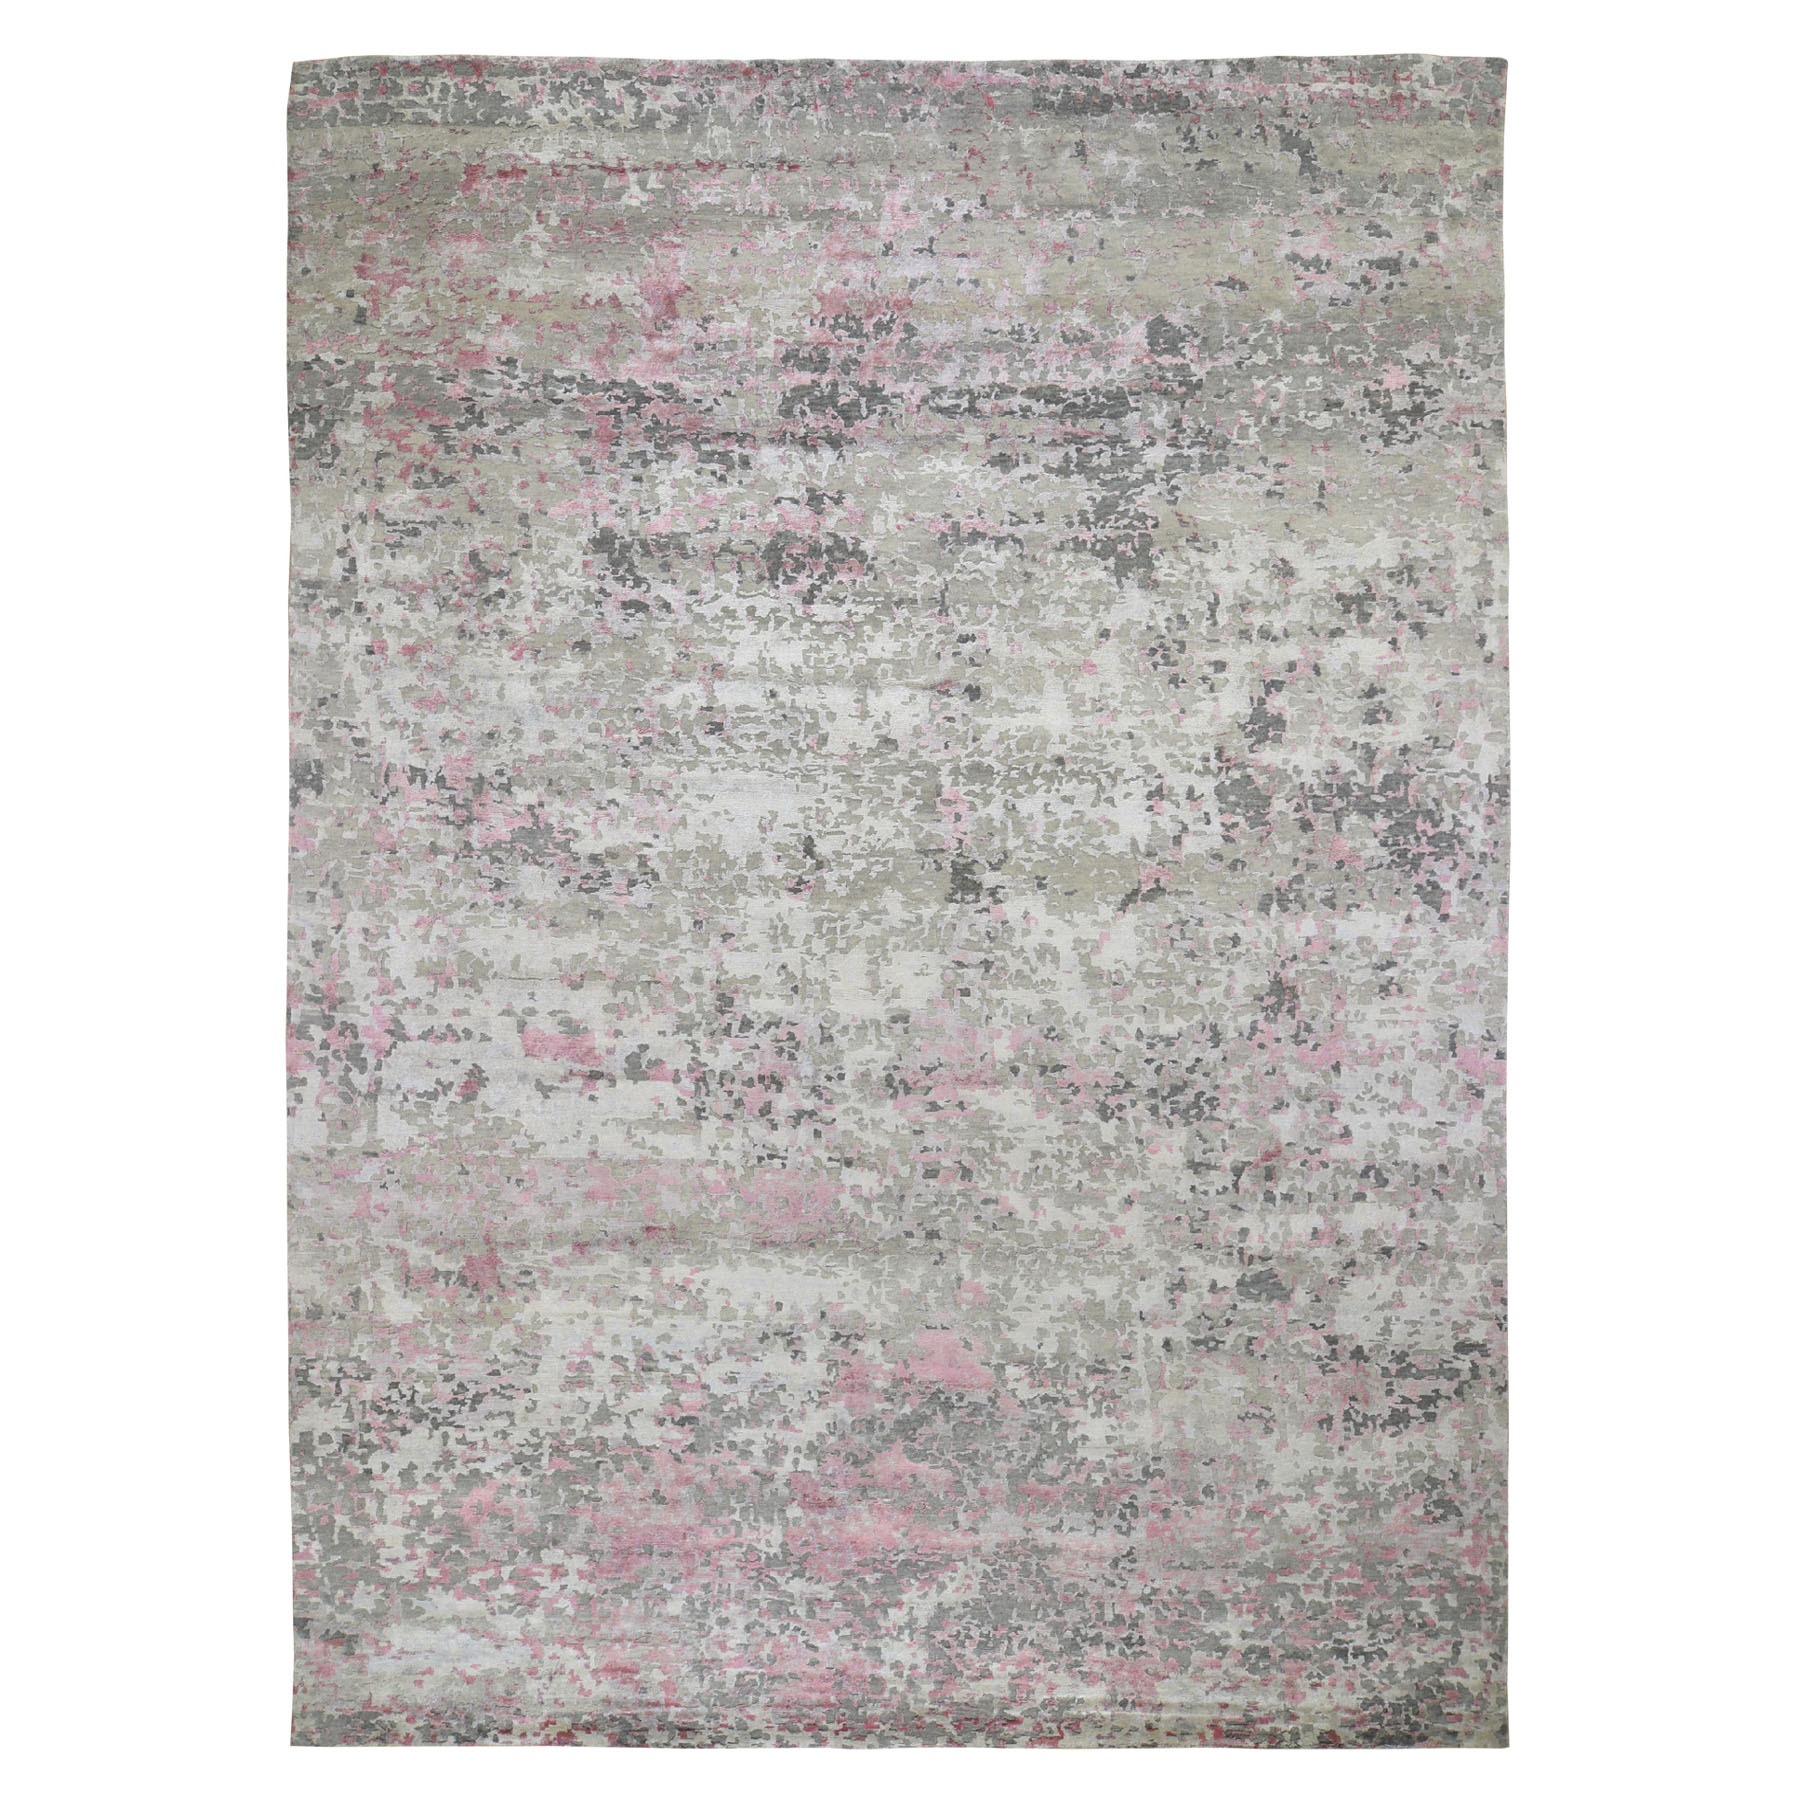 10'x13'9" Hi-Low Pile Abstract Design Wool And Silk Hand Woven Oriental Rug 